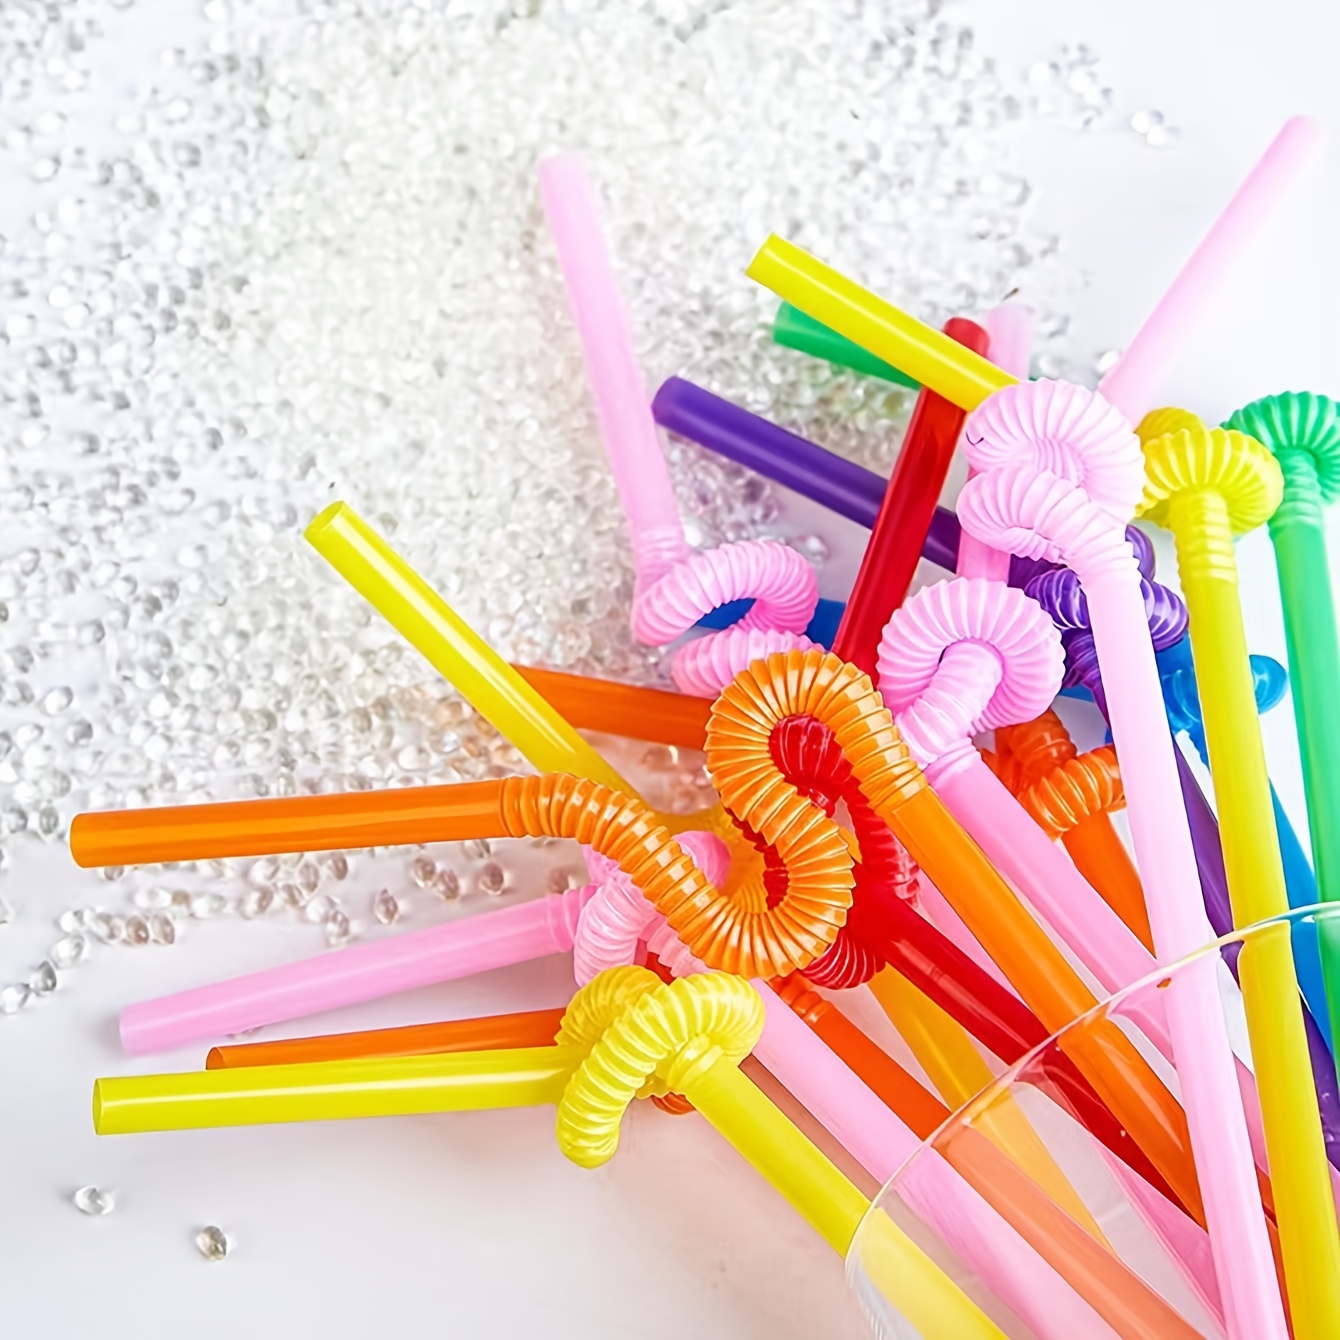 Colorful Extra Long Flexible Bendy Straws - 100 Pieces 